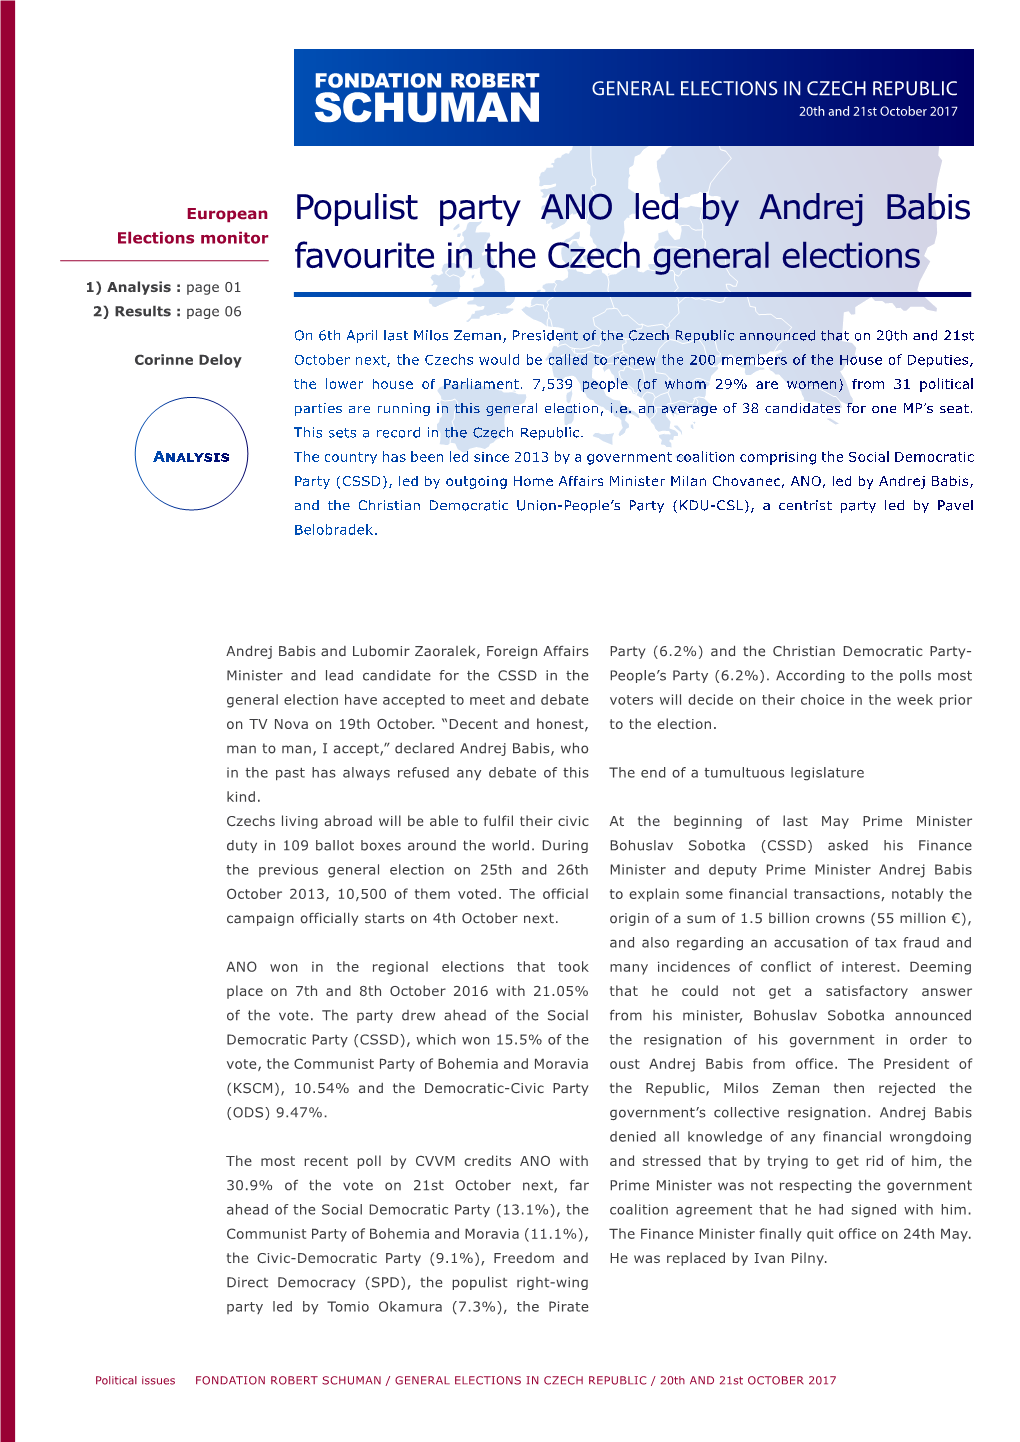 FONDATION ROBERT SCHUMAN / GENERAL ELECTIONS in CZECH REPUBLIC / 20Th and 21St OCTOBER 2017 General Elections in Czech Republic 20Th Et 21St October 2017